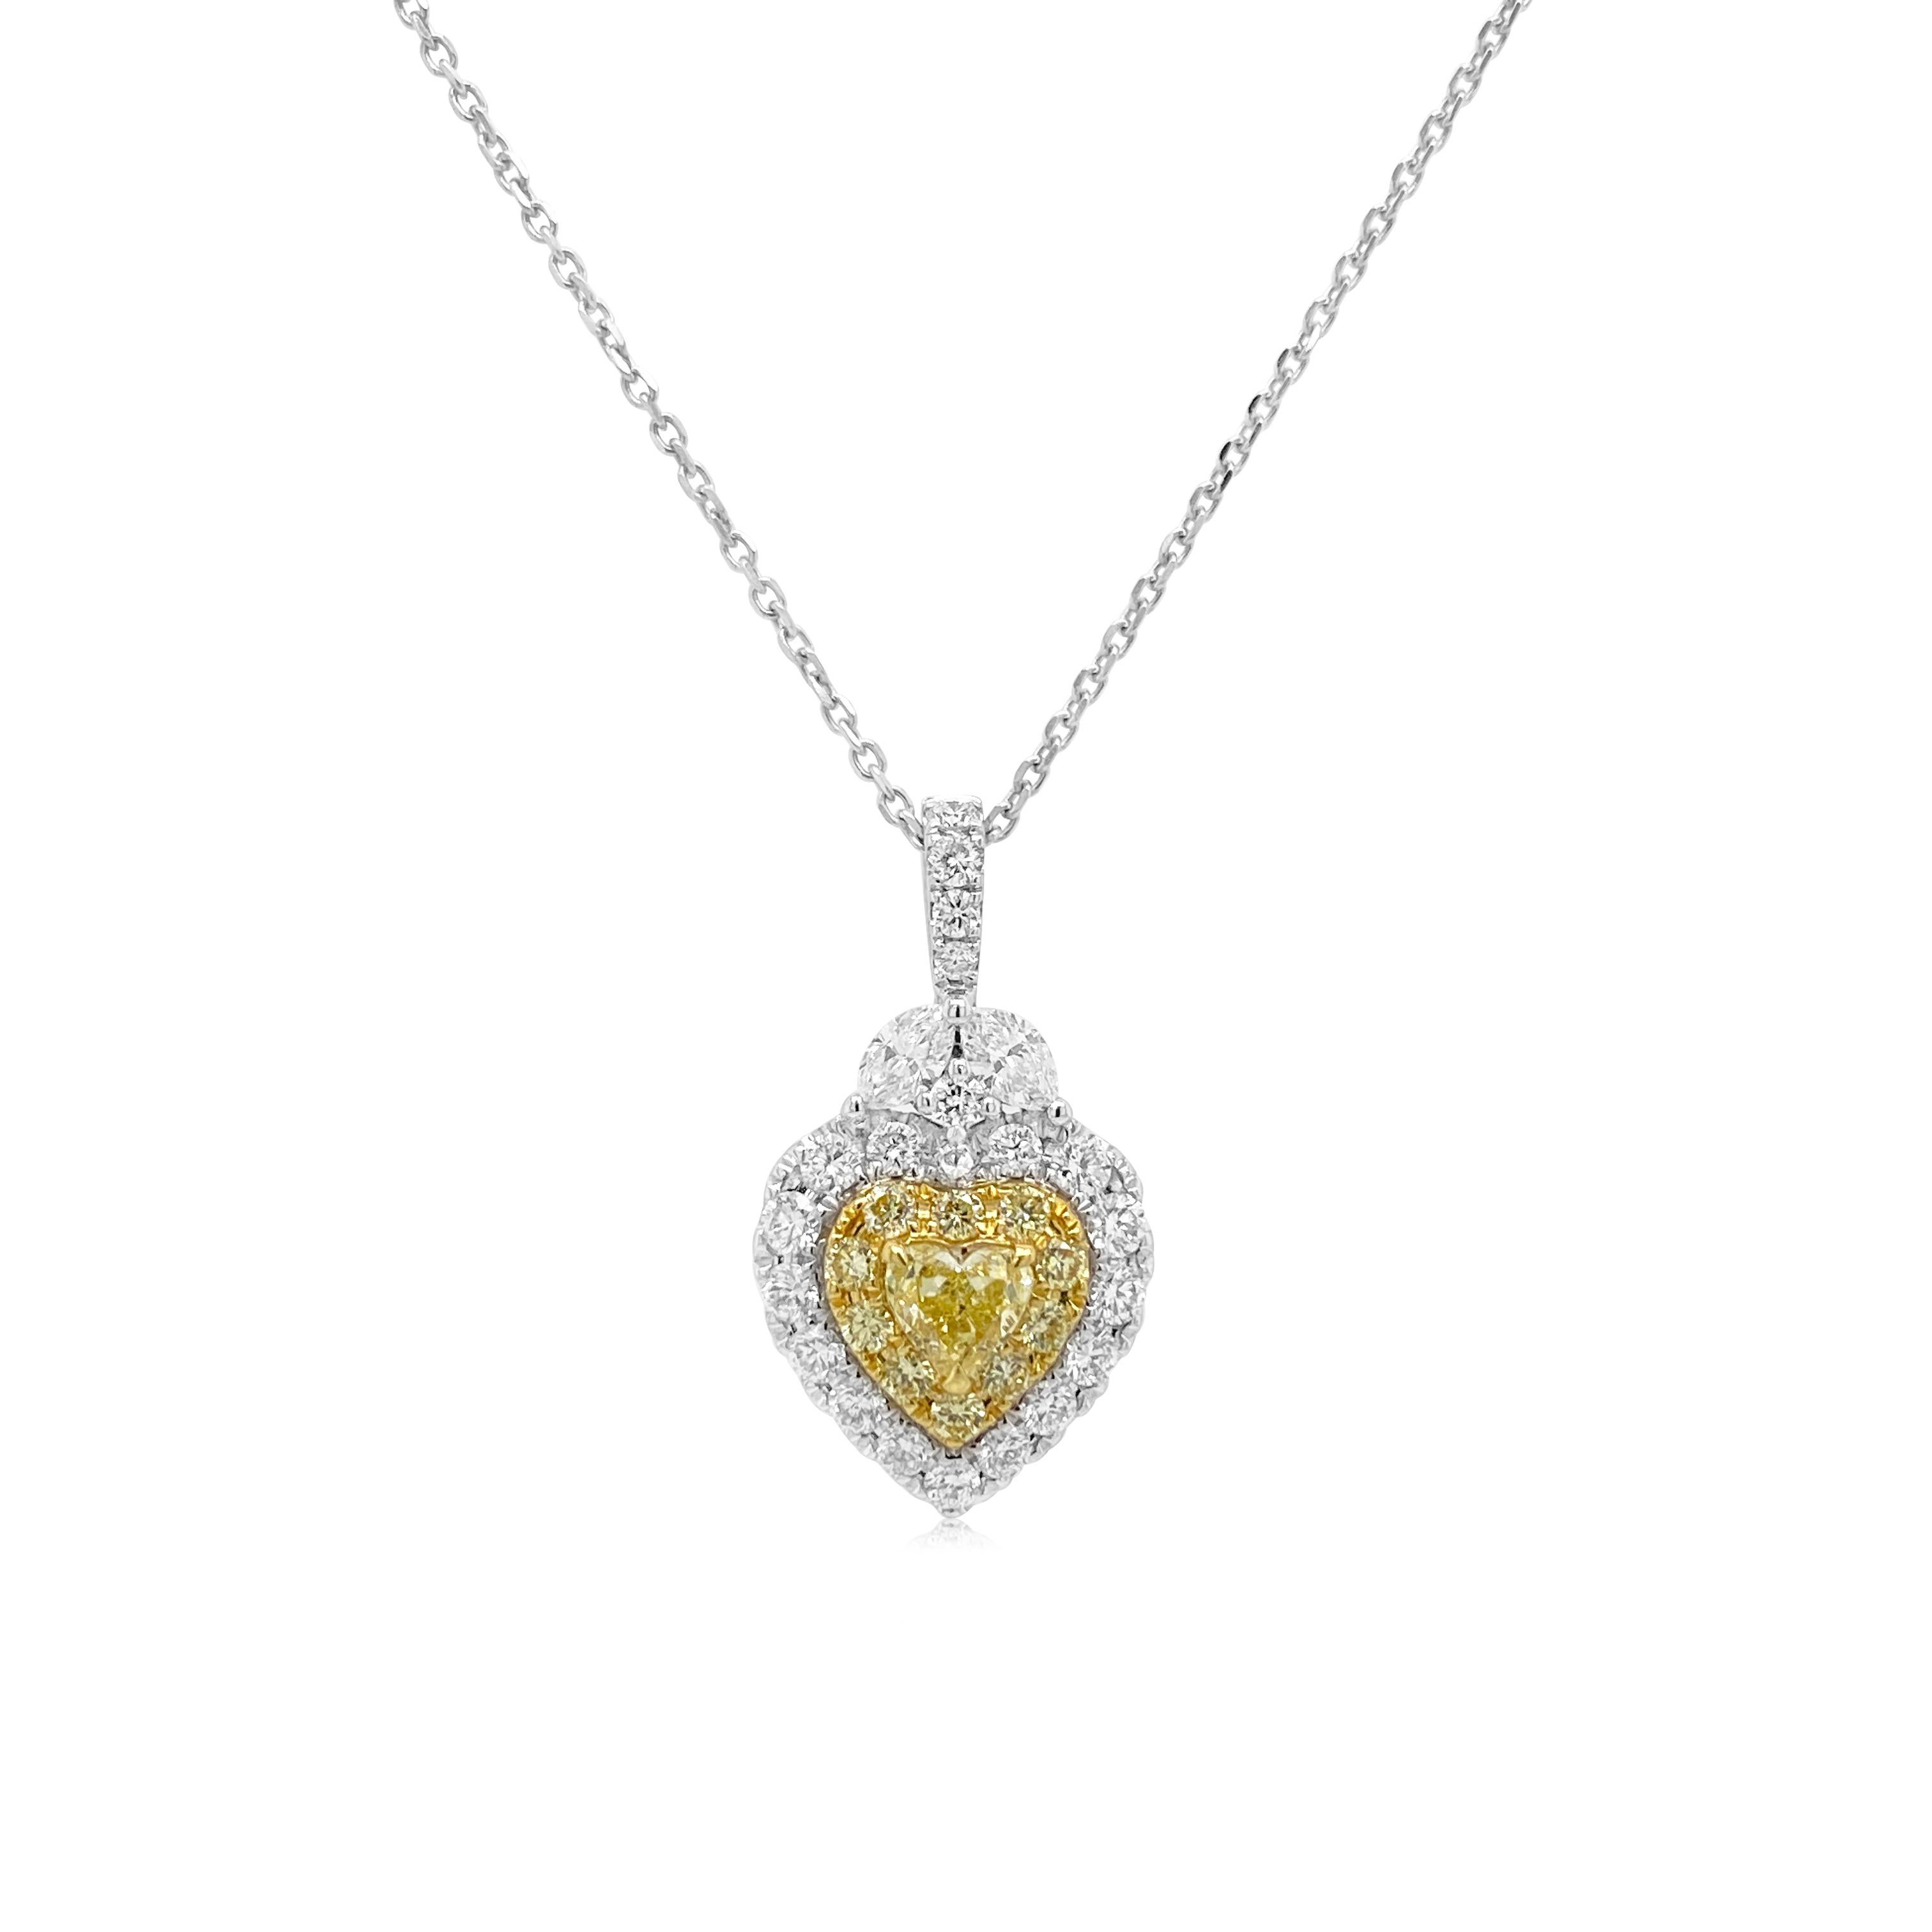 This charming yellow diamond pendant is set in white and yellow gold surrounded with round brilliant cut yellow and white diamonds. Heart shaped Yellow diamonds are rare and known to attract happiness and prosperity. An elegant addition to your fine